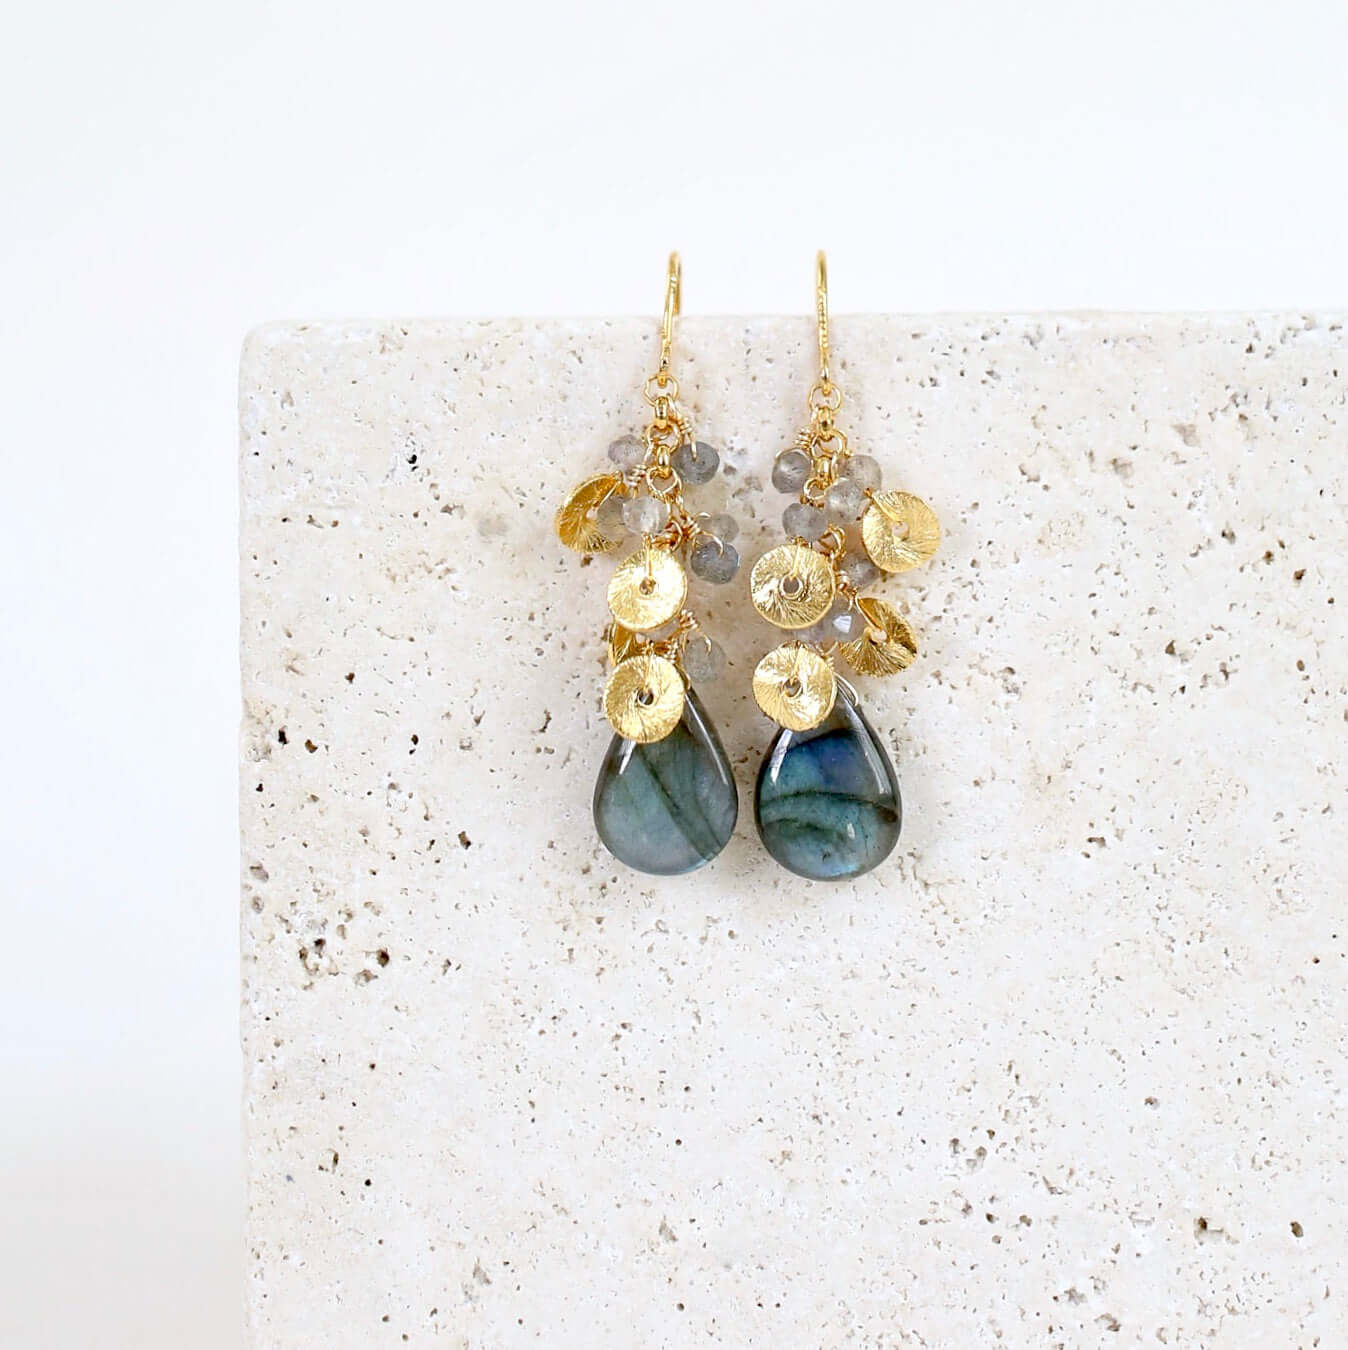  Labradorite Gemstone with mini stones  and Gold Accents   Gold Drop Earrings